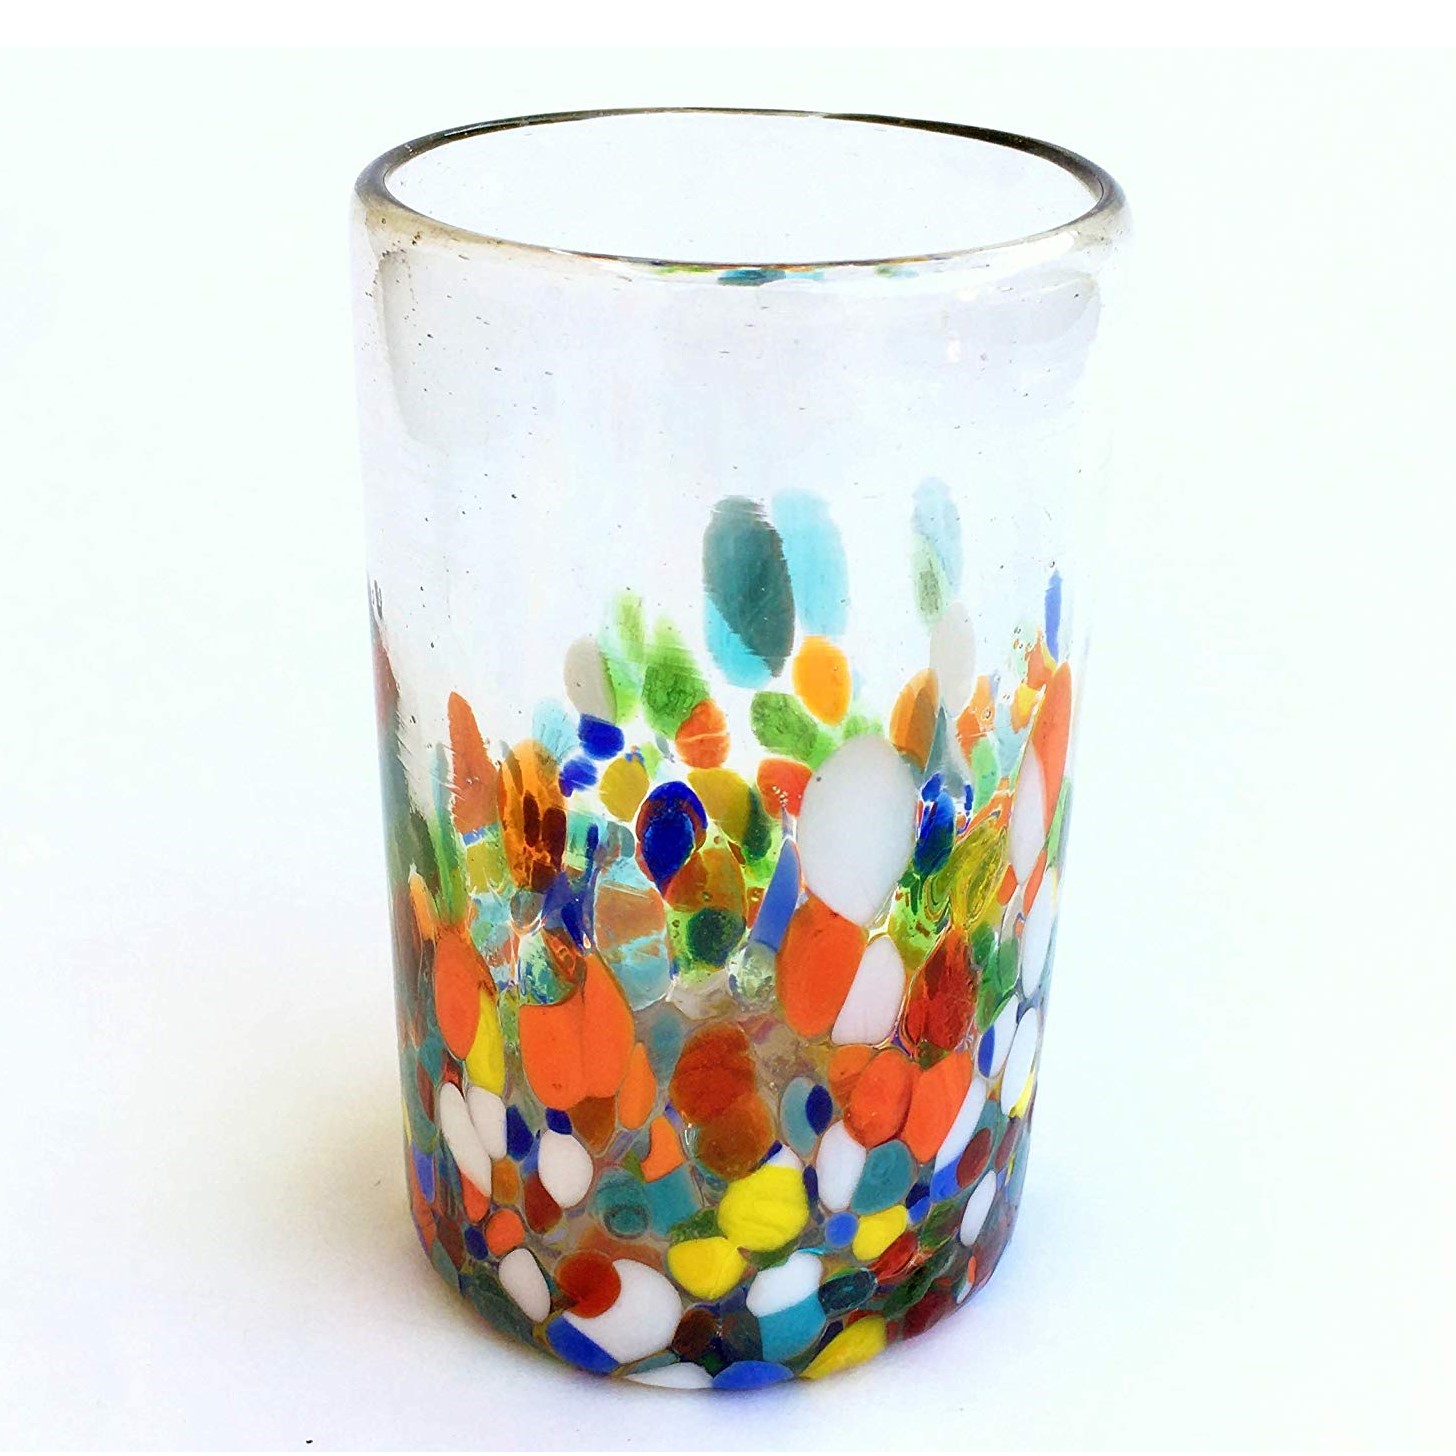 Wholesale MEXICAN GLASSWARE / Clear & Confetti 14 oz Drinking Glasses  / Our Clear & Confetti drinking glasses combine the best of two worlds: clear, thick, sturdy handcrafted glass on top, meets the colorful, festive, confetti bottom! These glasses will sure be a standout in any table setting or as a fabulous gift for your loved ones. Crafted one by one by skilled artisans in Tonala, Mexico, each glass is different from the next making them unique works of art. You'll be amazed at how they make having a simple glass of water a happier experience. Each glass holds approximately 14 oz of liquid and stands a bit over 5